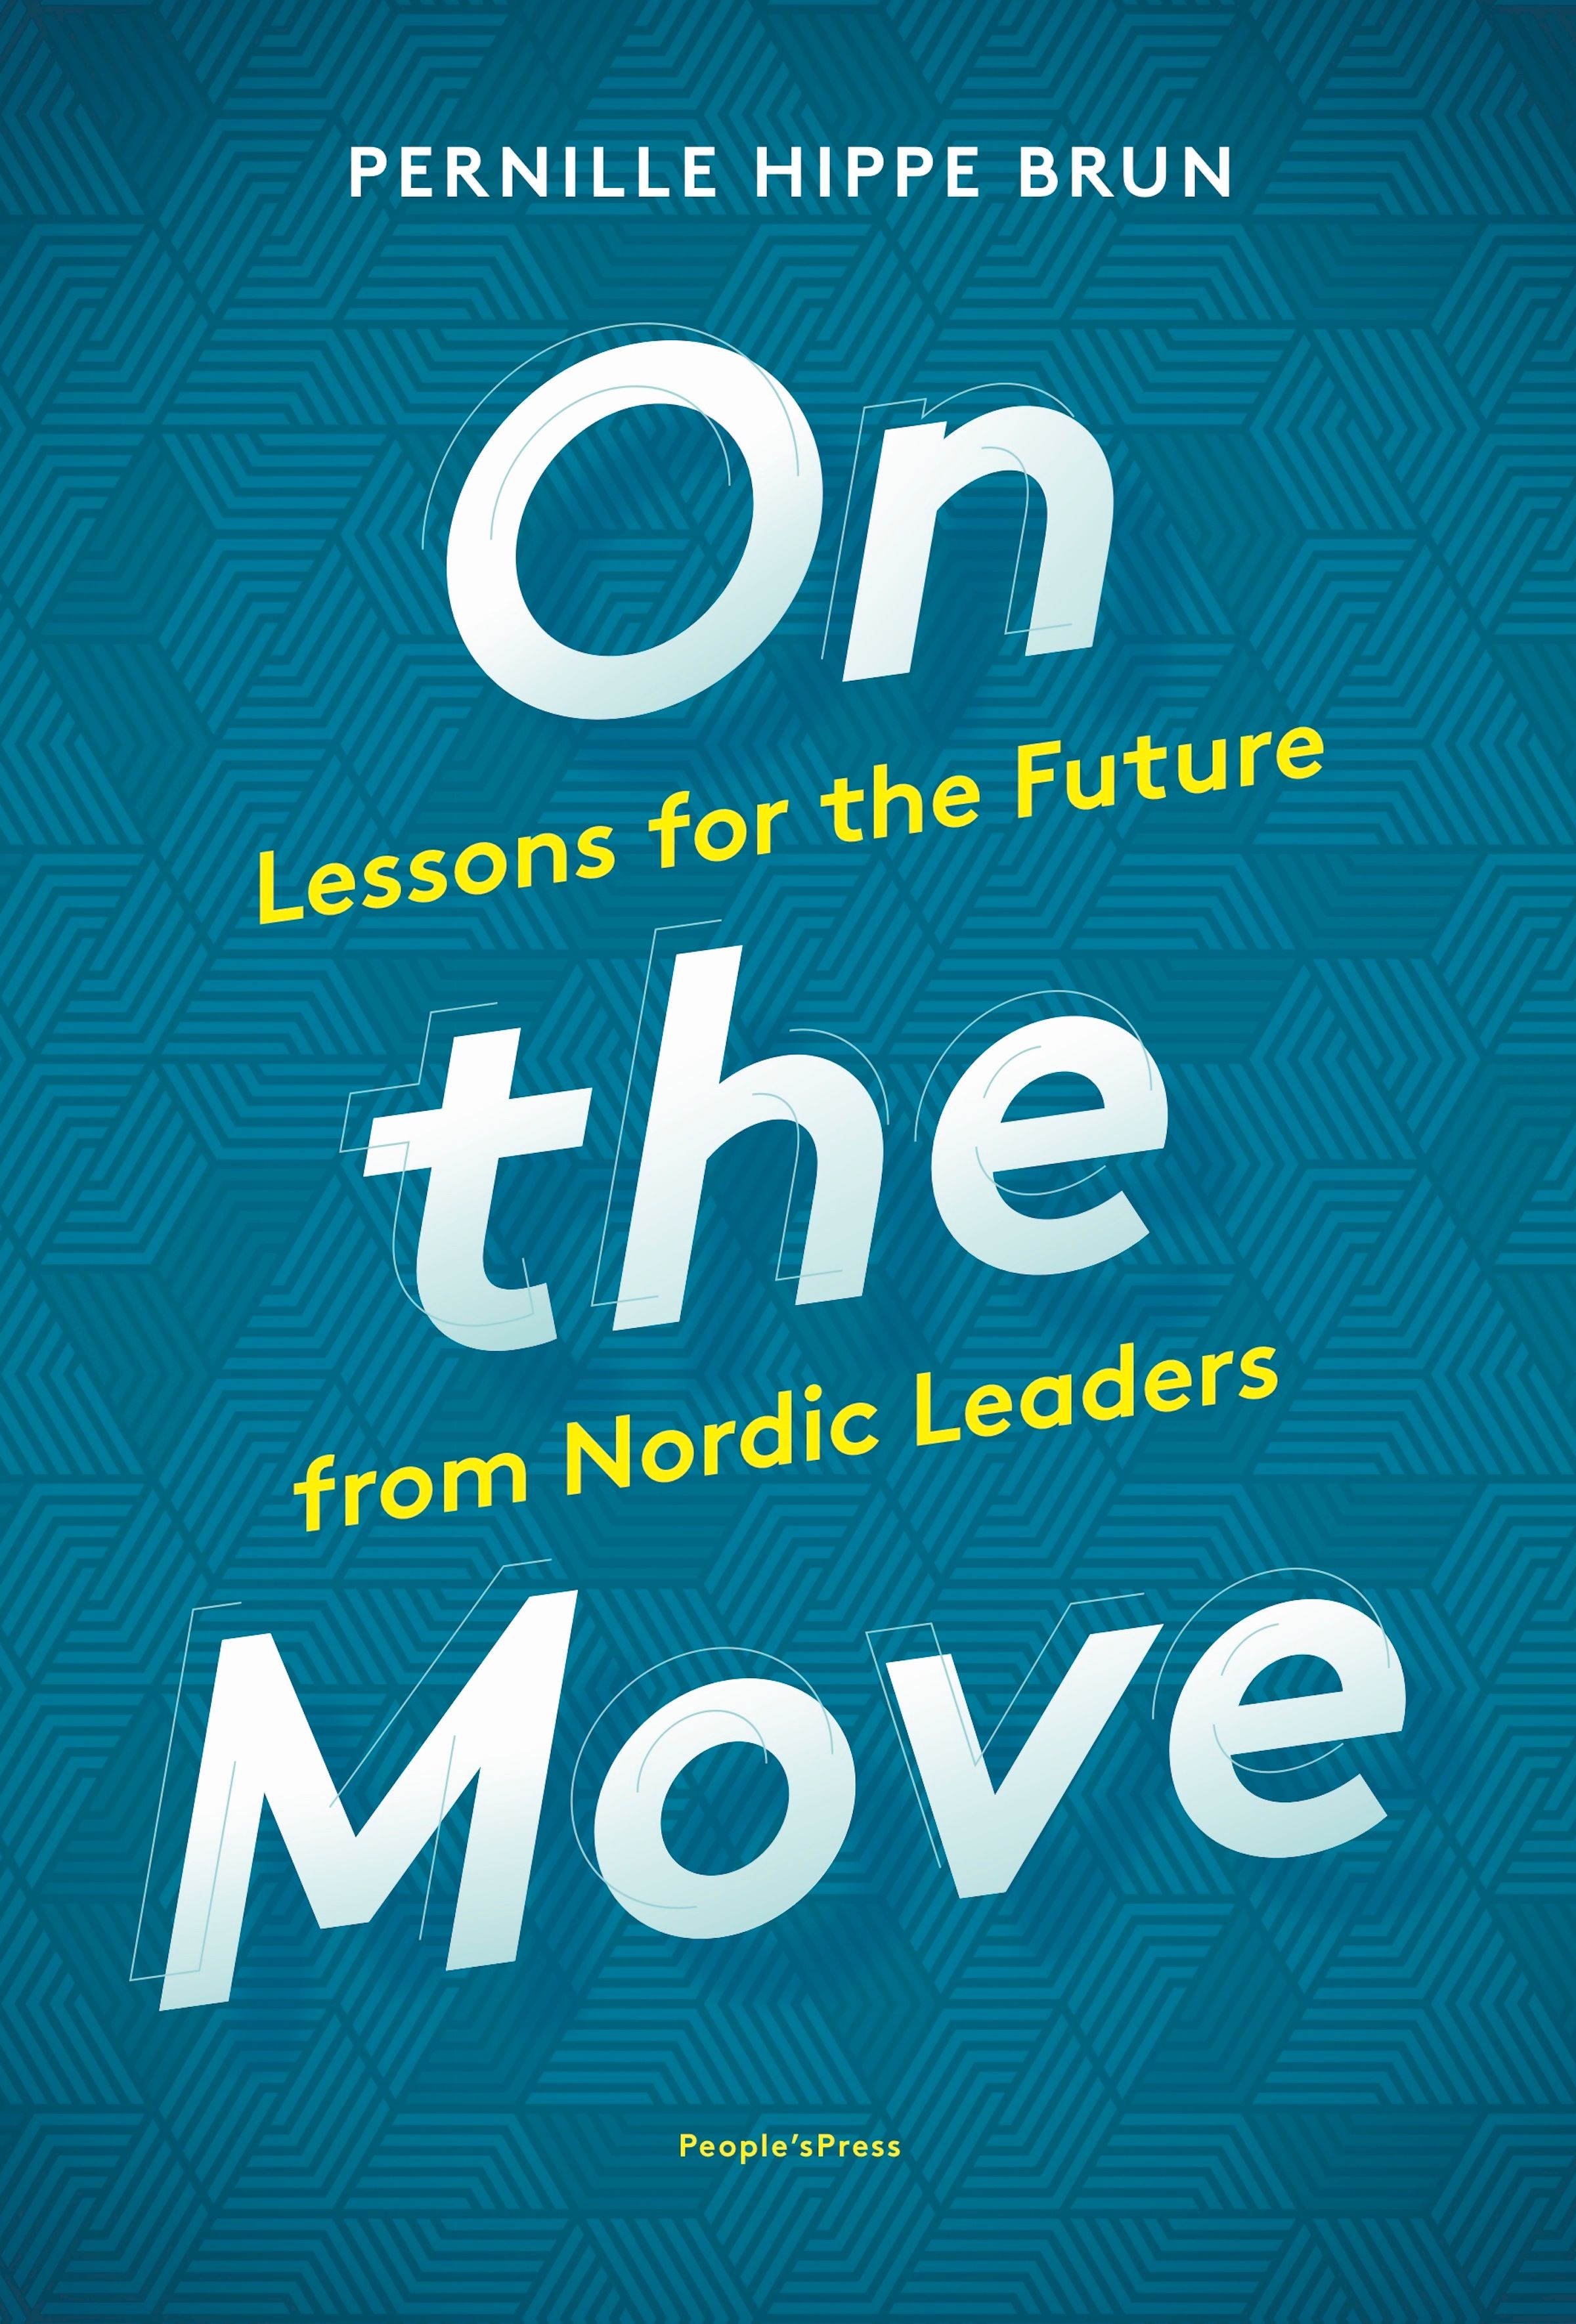 On The Move, eBook by Pernille Hippe Brun